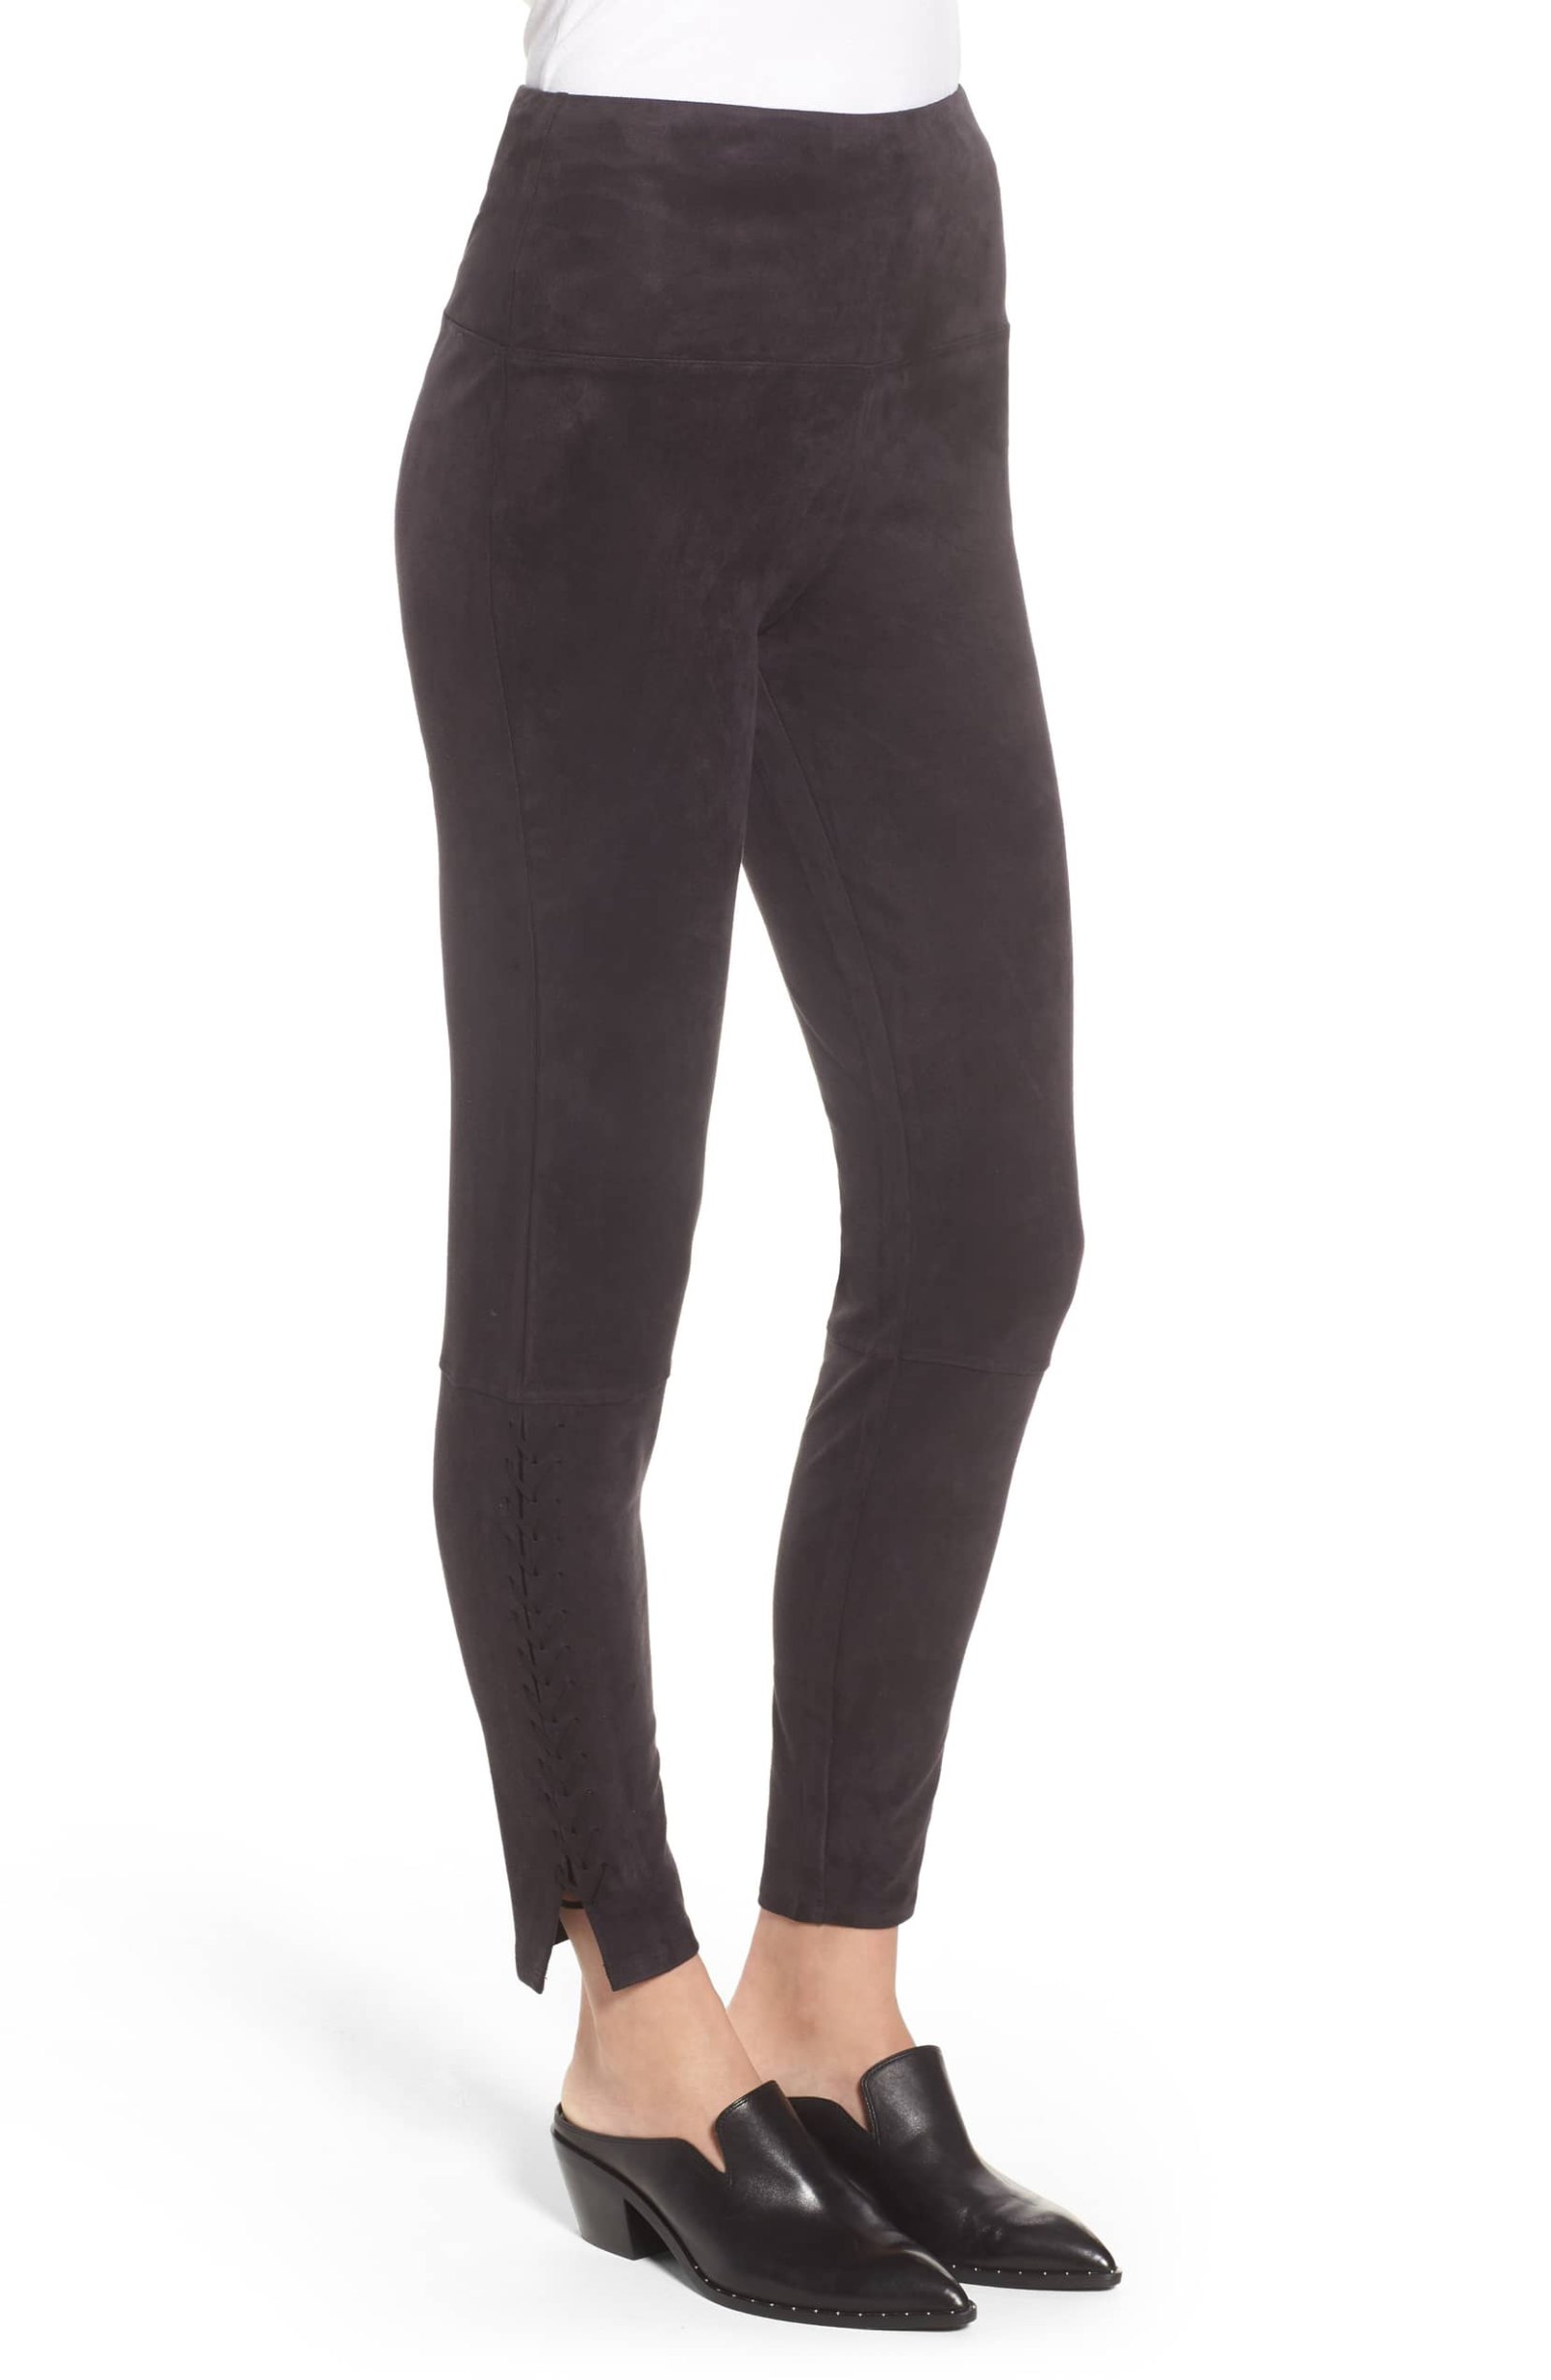 Nordstrom Sale: These Faux Suede Leggings Look Just Like Trousers | Us ...